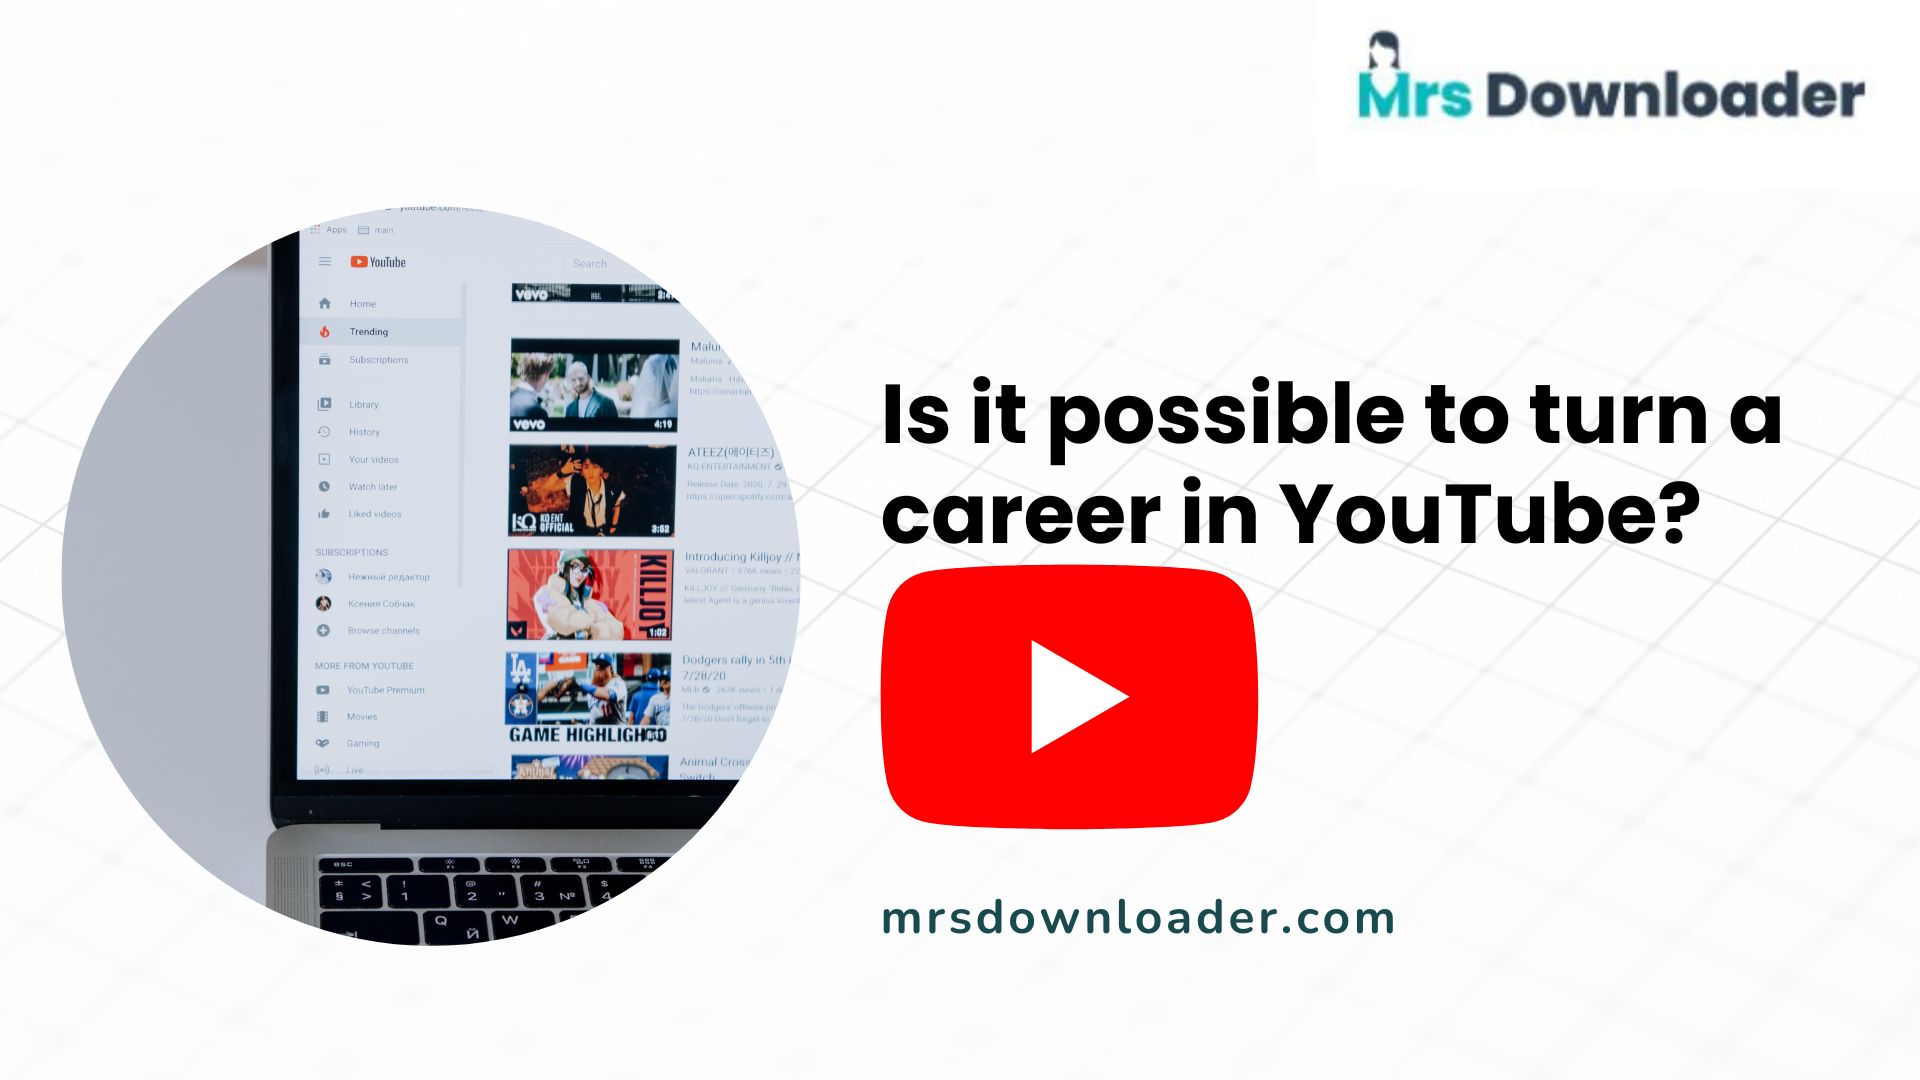 Is it possible to turn a career in YouTube into a lucrative, sustainable of income?